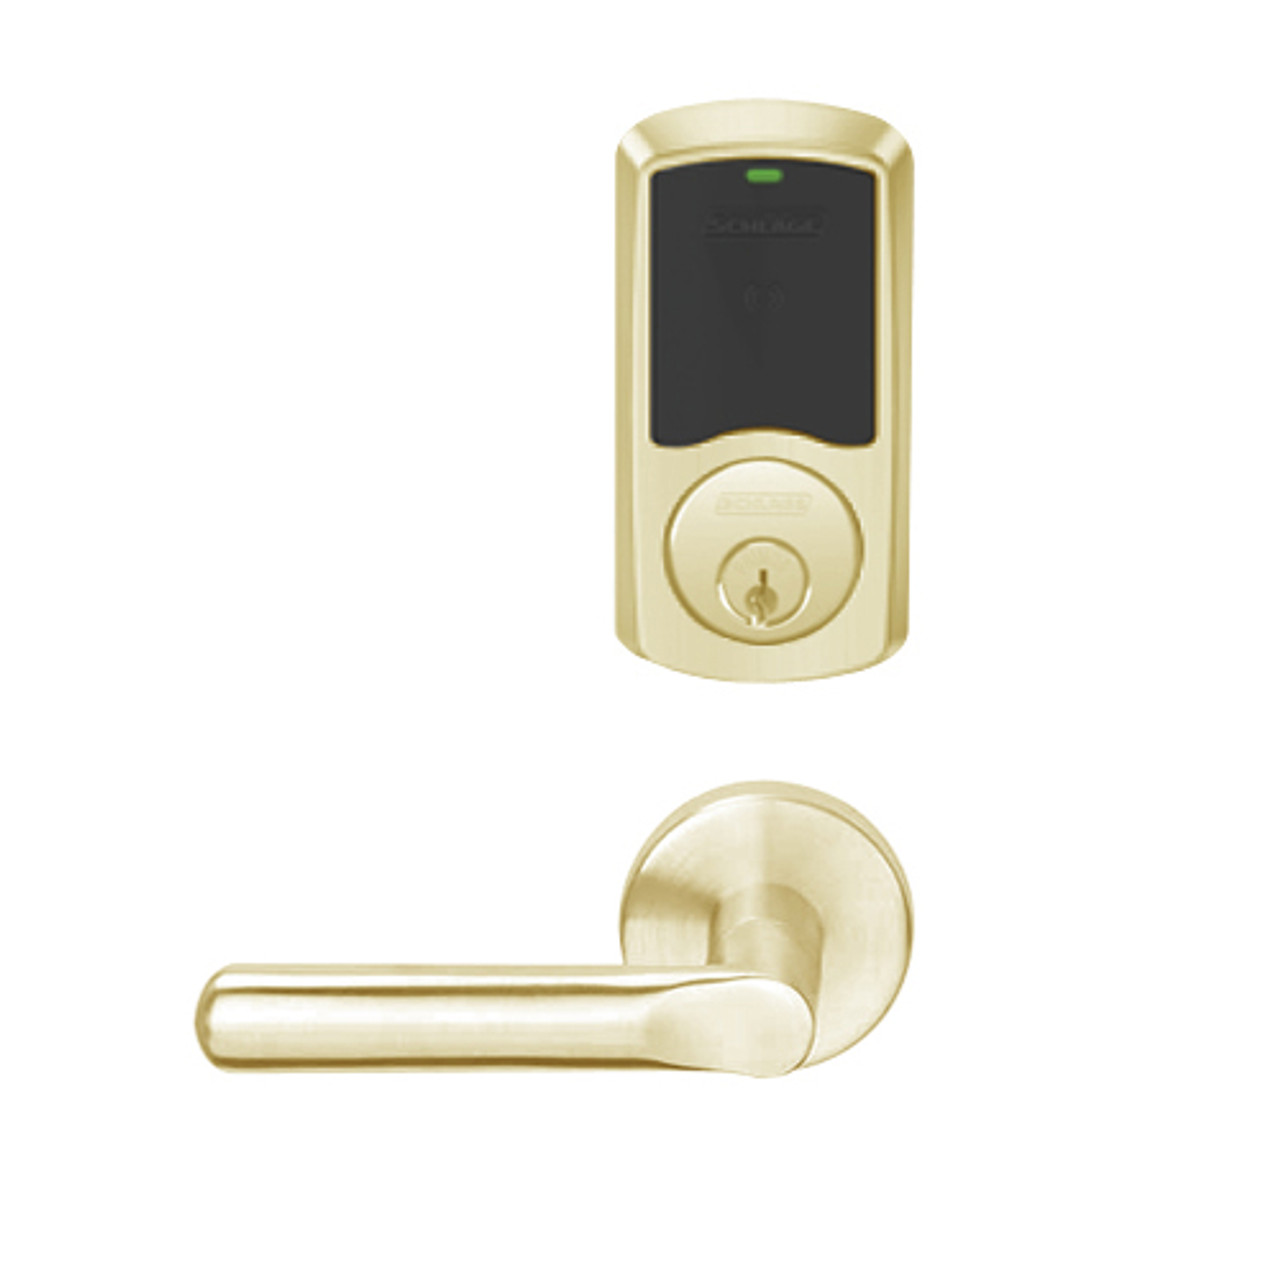 LEMB-GRW-P-18-606-00C Schlage Privacy/Office Wireless Greenwich Mortise Lock with LED Indicator and 18 Lever in Satin Brass